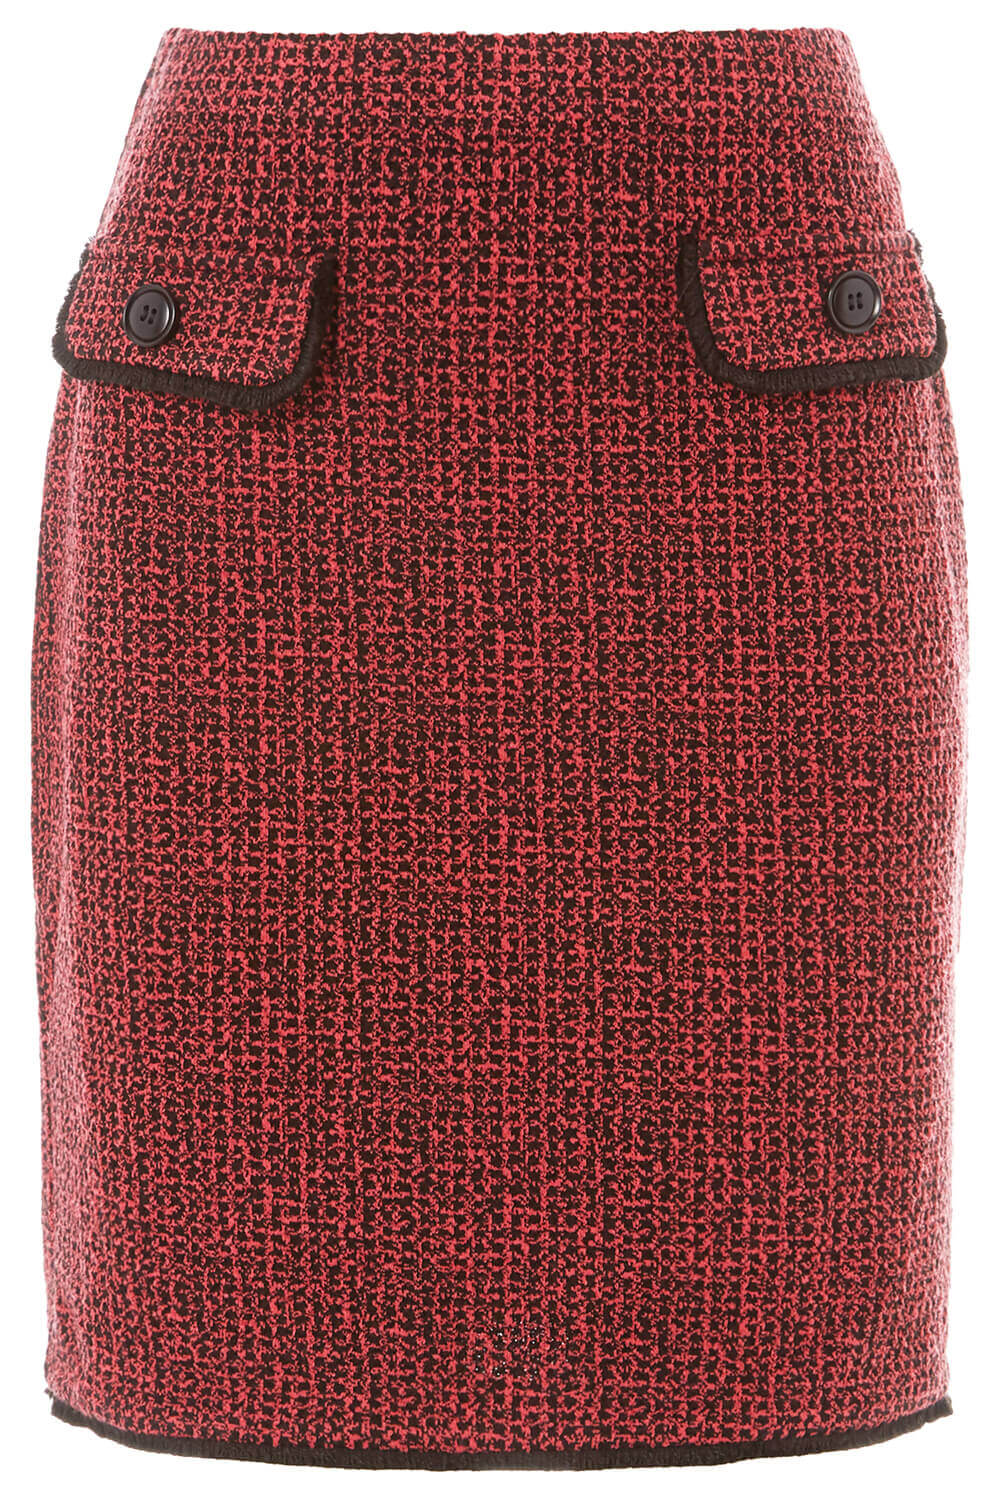 PINK Two Tone Textured Skirt , Image 5 of 5